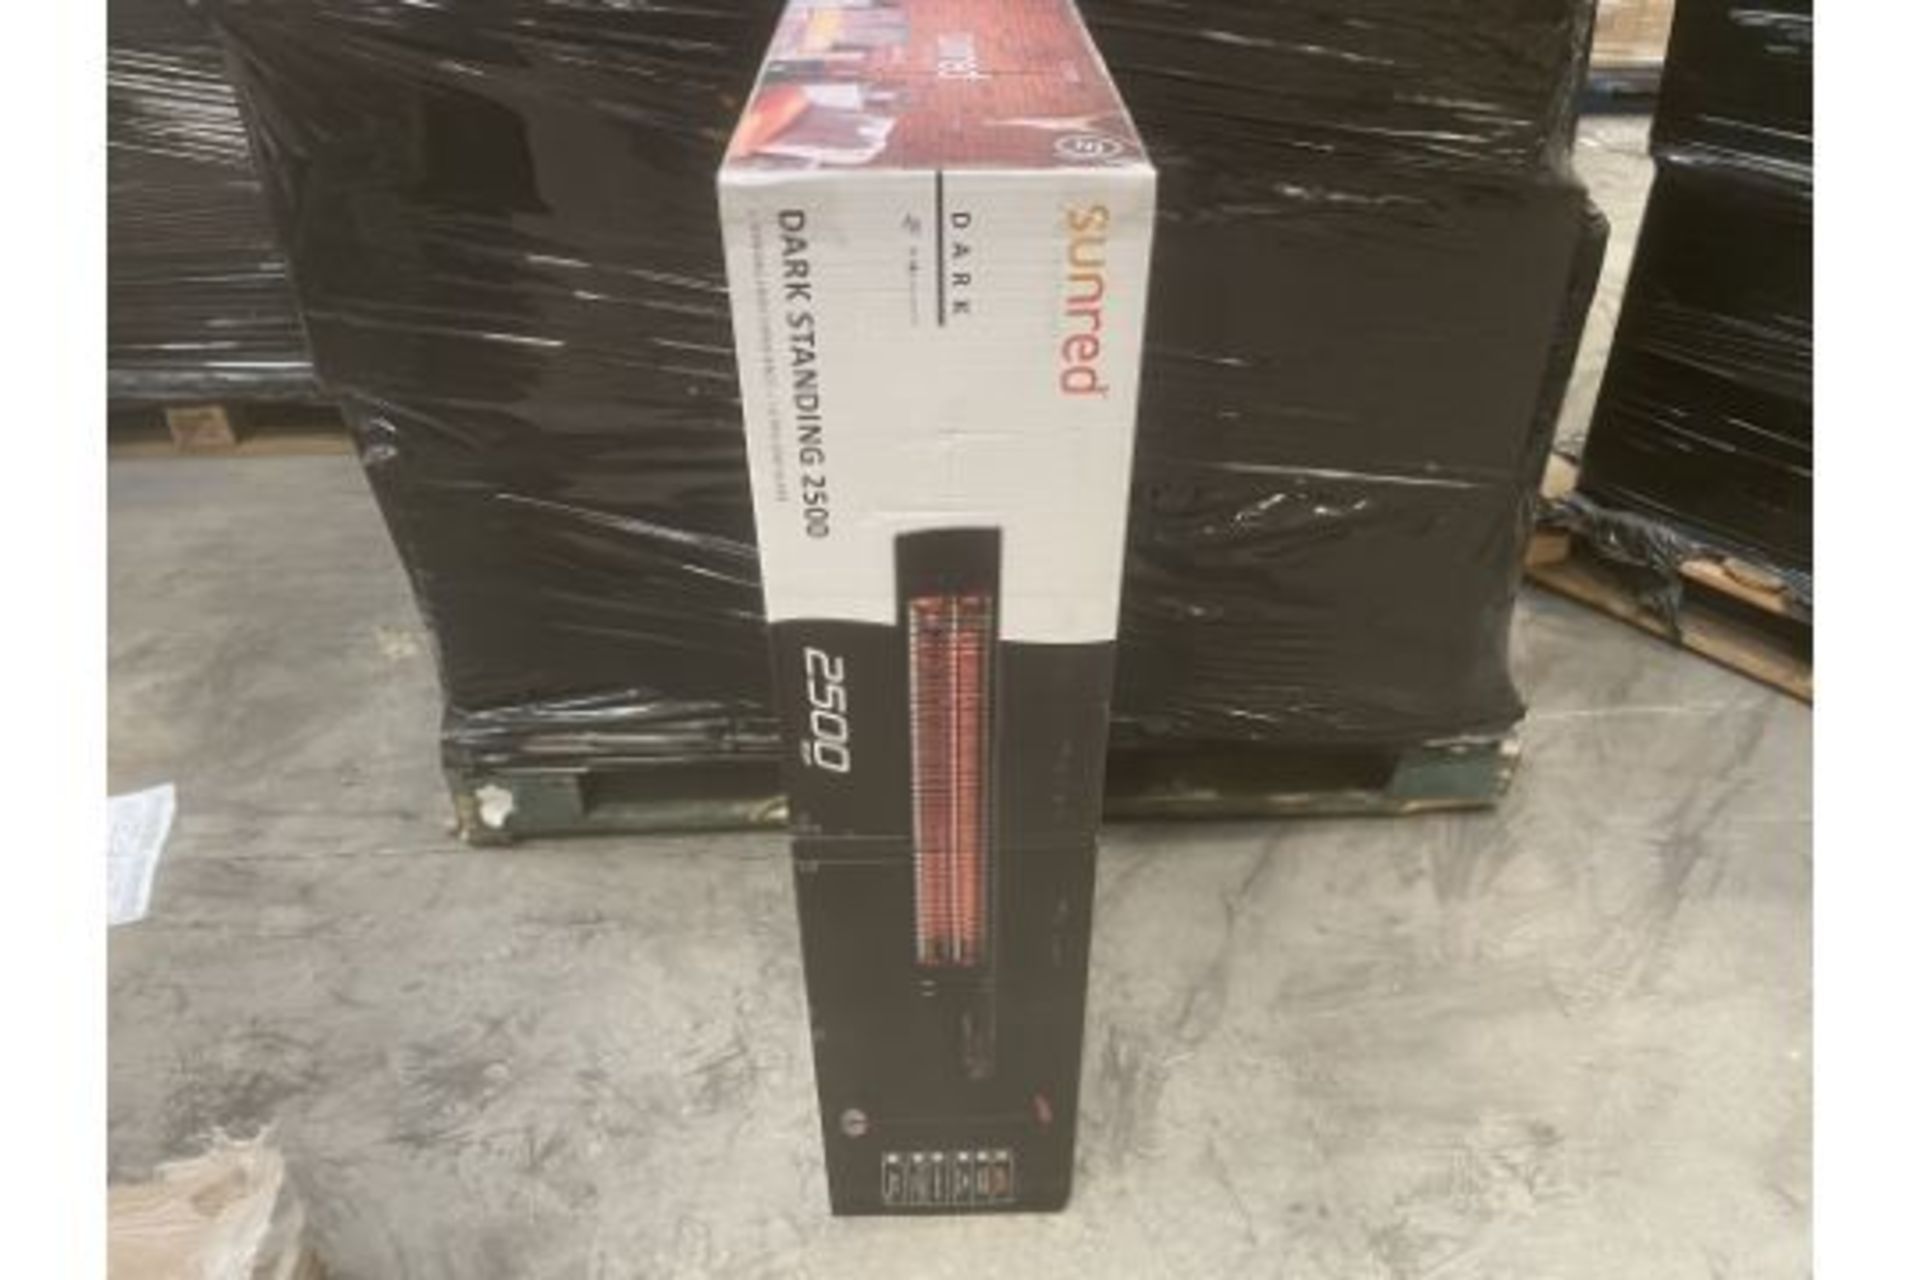 Brand New The Sunred Heater Dark Standing 2500W RRP £399. A high quality and efficient outdoor